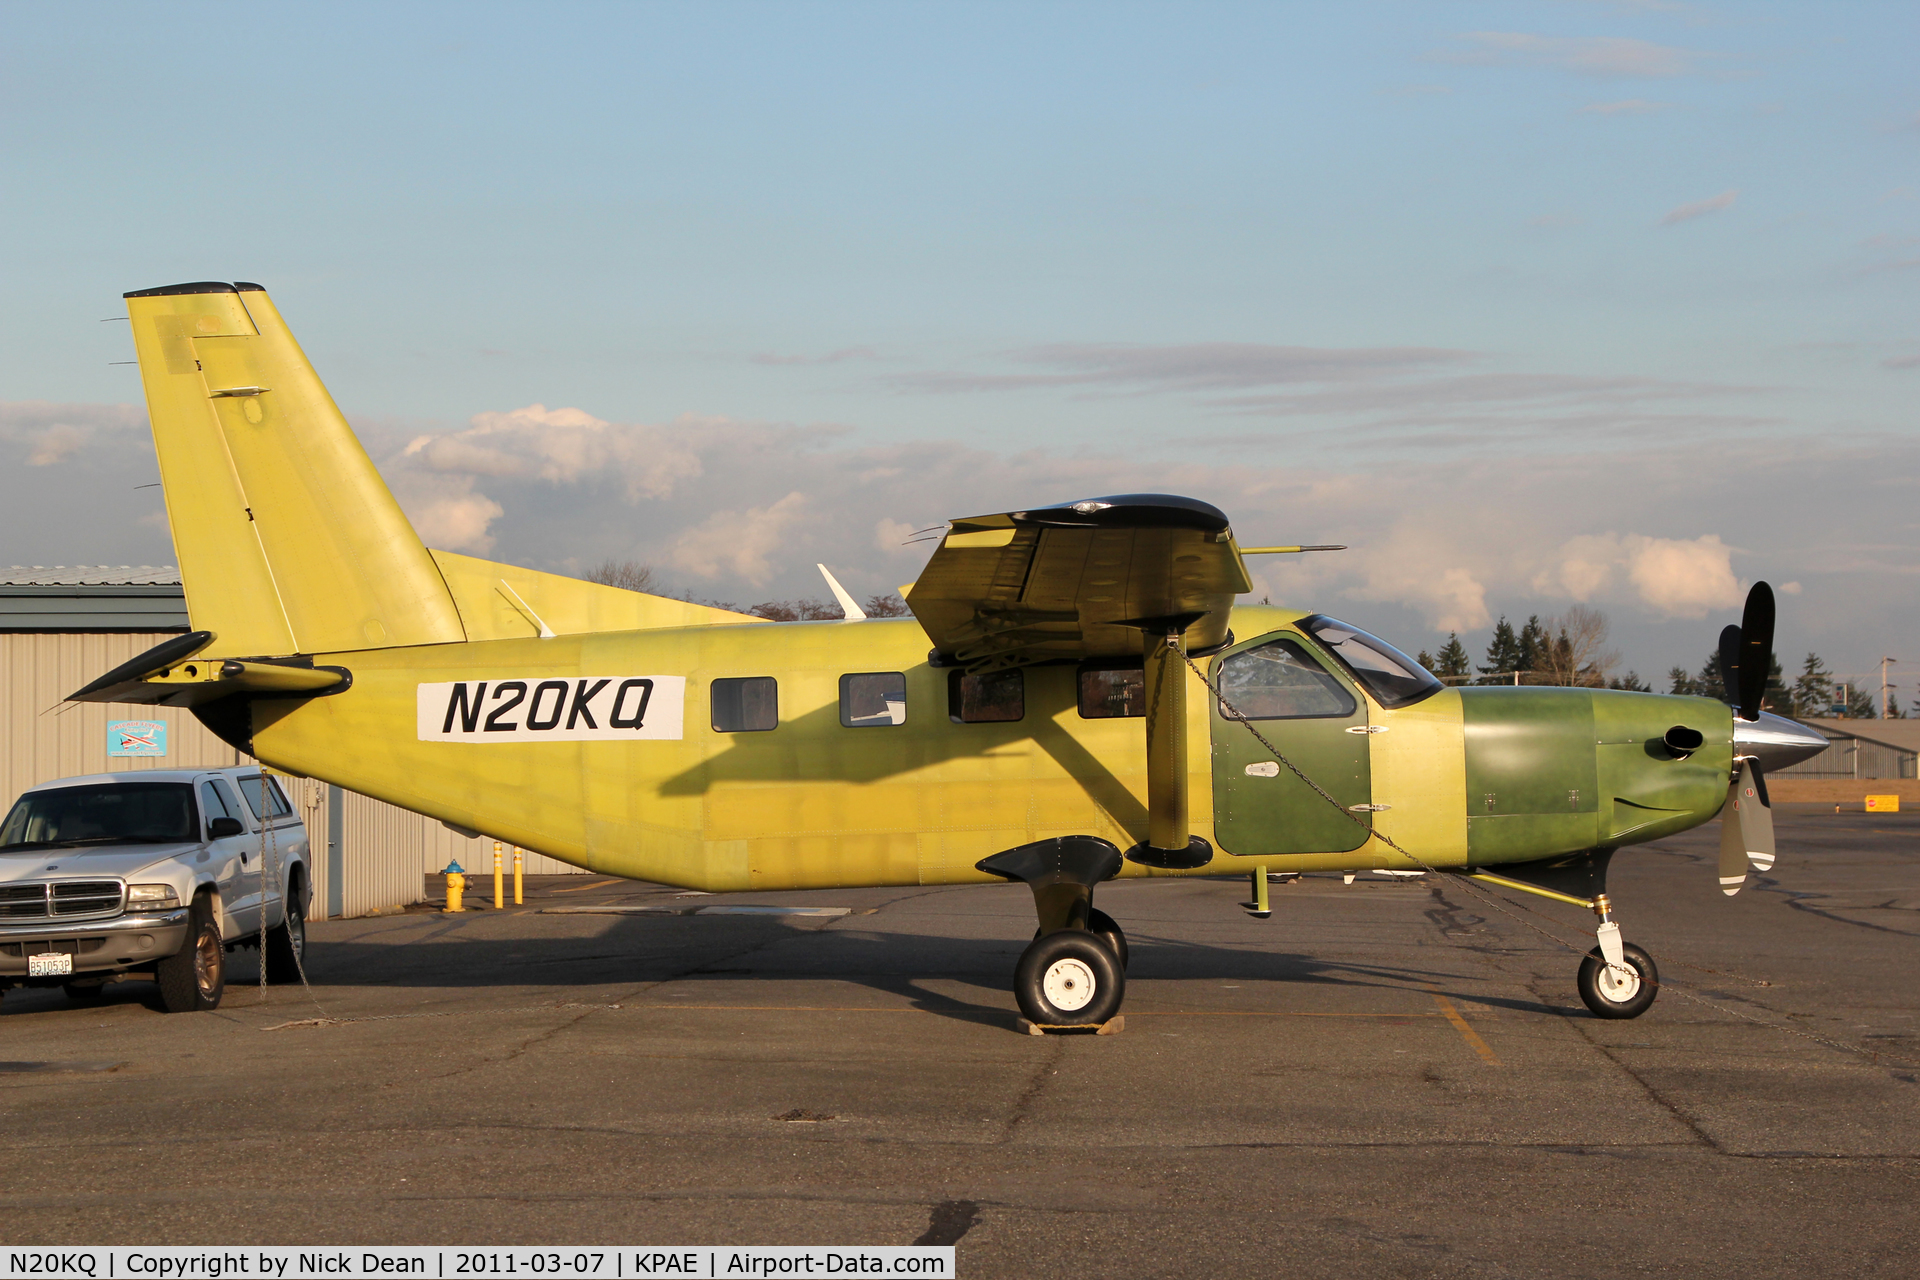 N20KQ, 2011 Quest Kodiak 100 C/N 100-0052, KPAE ferry reg N20KQ used again for bringing 100-0052 over from Sandpoint Idaho for paint at Sunquest Air Specialties